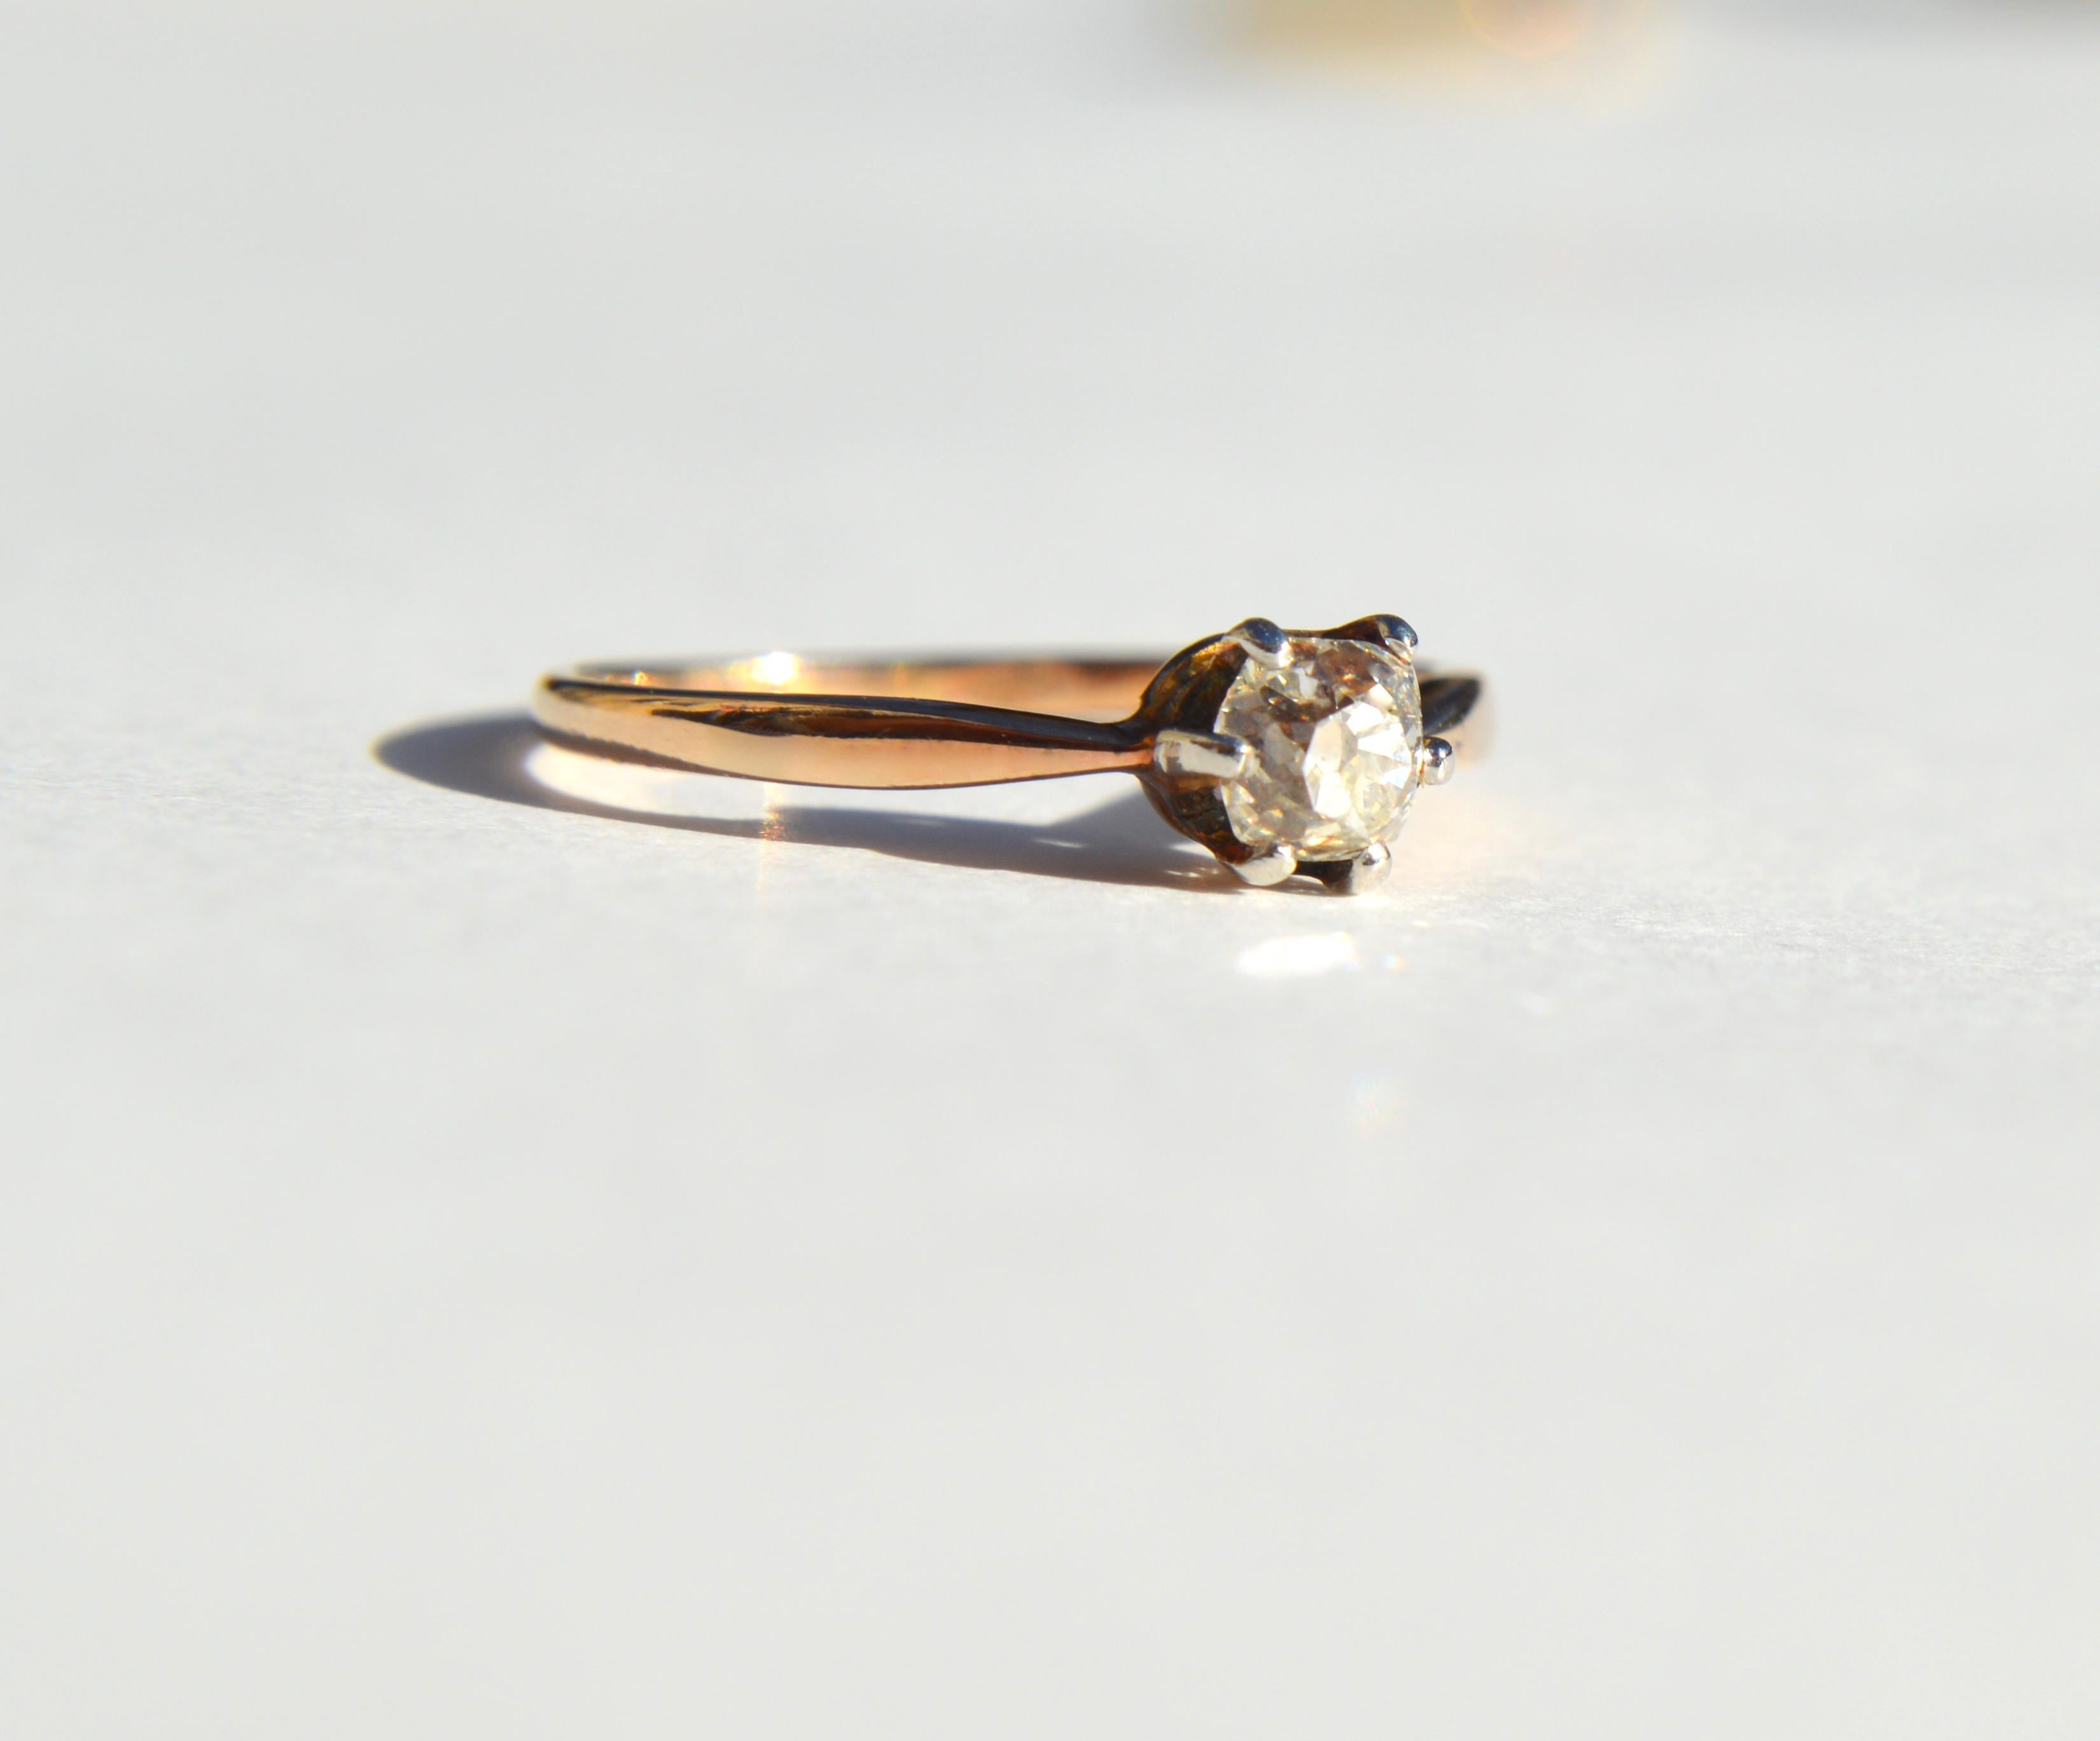 Beautiful antique Victorian era circa late 1800s .46 carat old minecut diamond solitaire engagement ring in 14K rose gold. Size 5, can be resized by your local jeweler. Diamond has been graded as color L, VS1 clarity (very slightly included). In